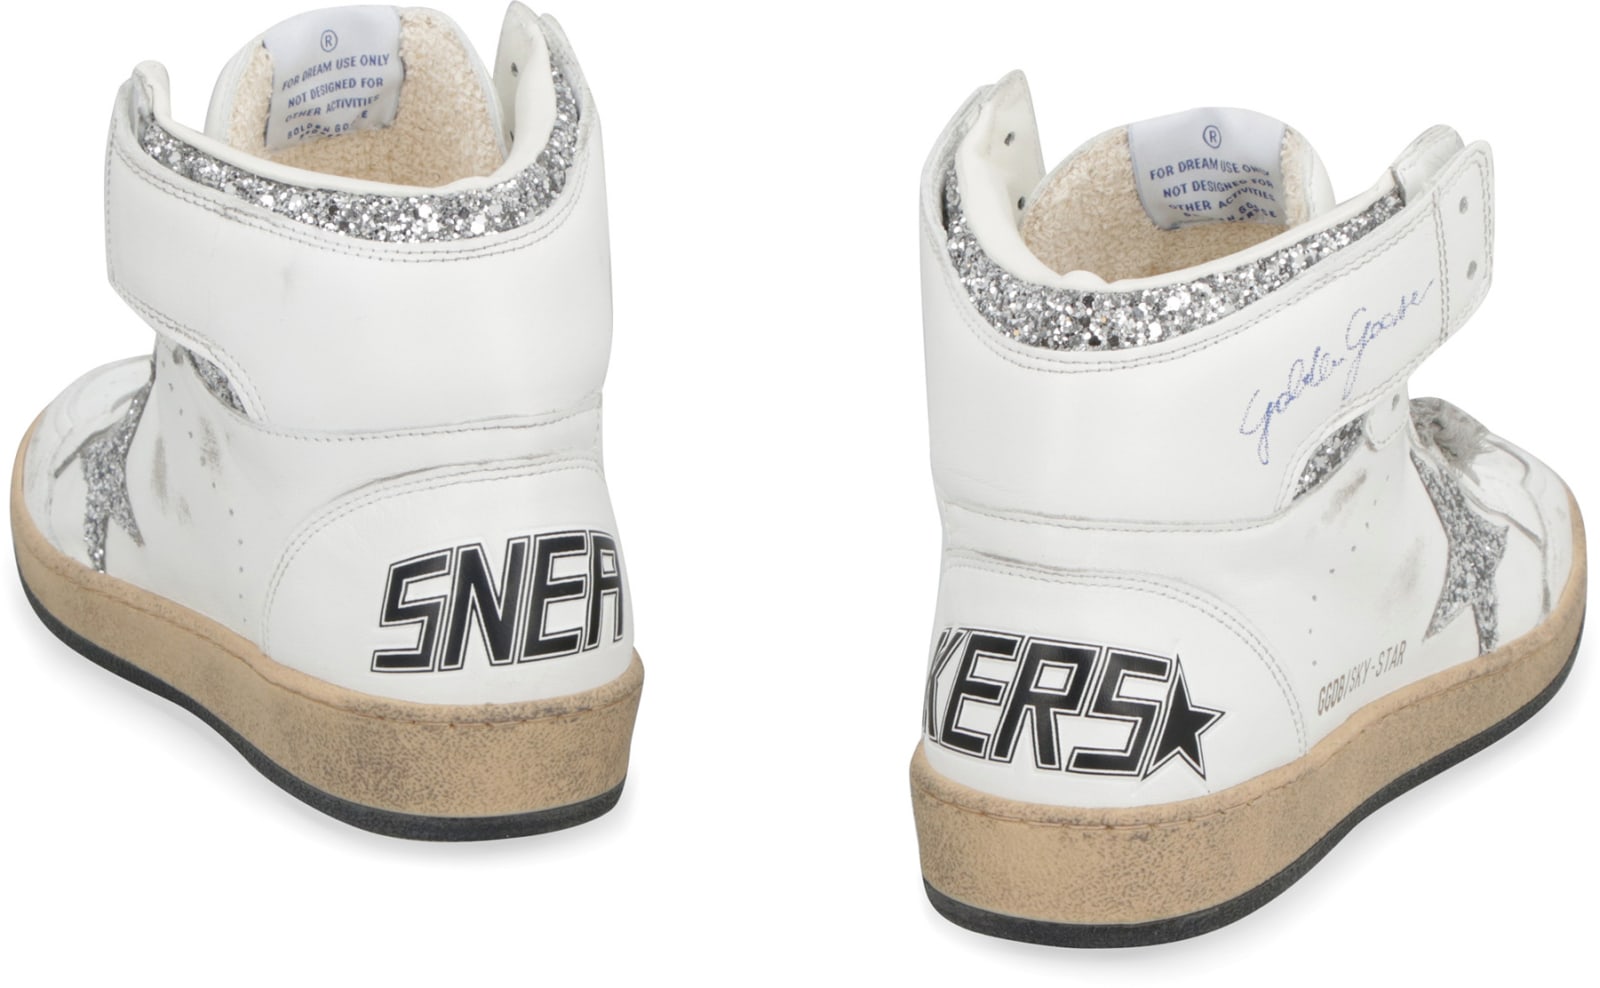 Shop Golden Goose Sky Starleather Sneakers In White